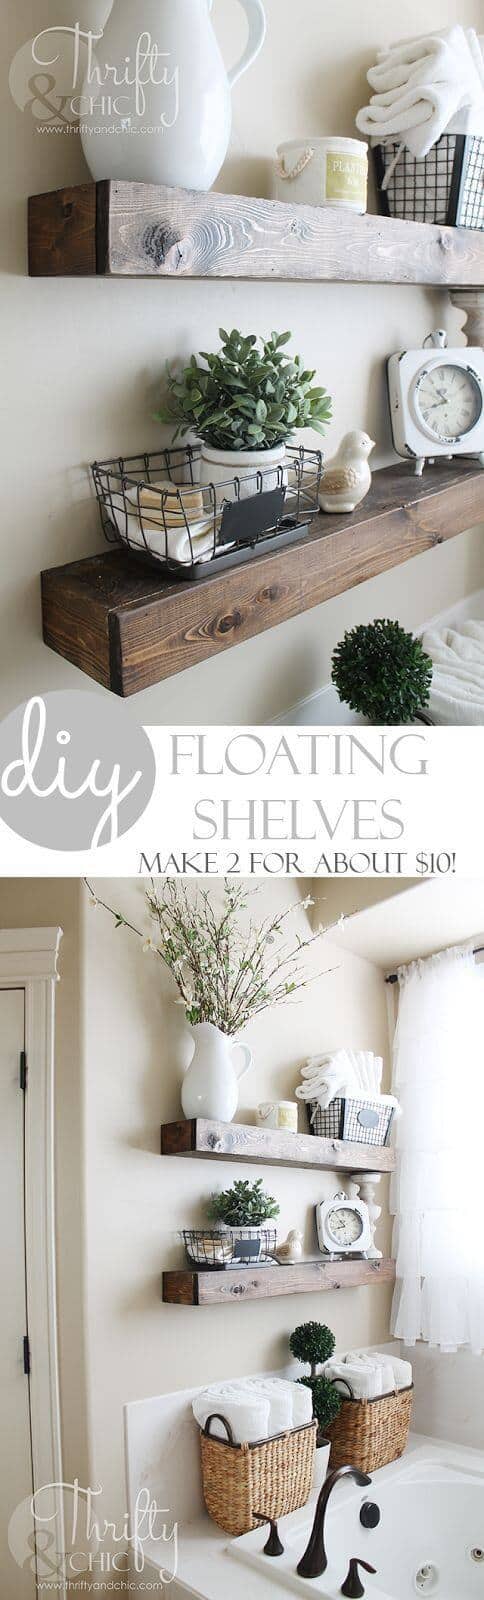 DIY Floating Shelves by Thrifty and Chic | DIY Farmhouse Decor Projects for Fixer Upper Style